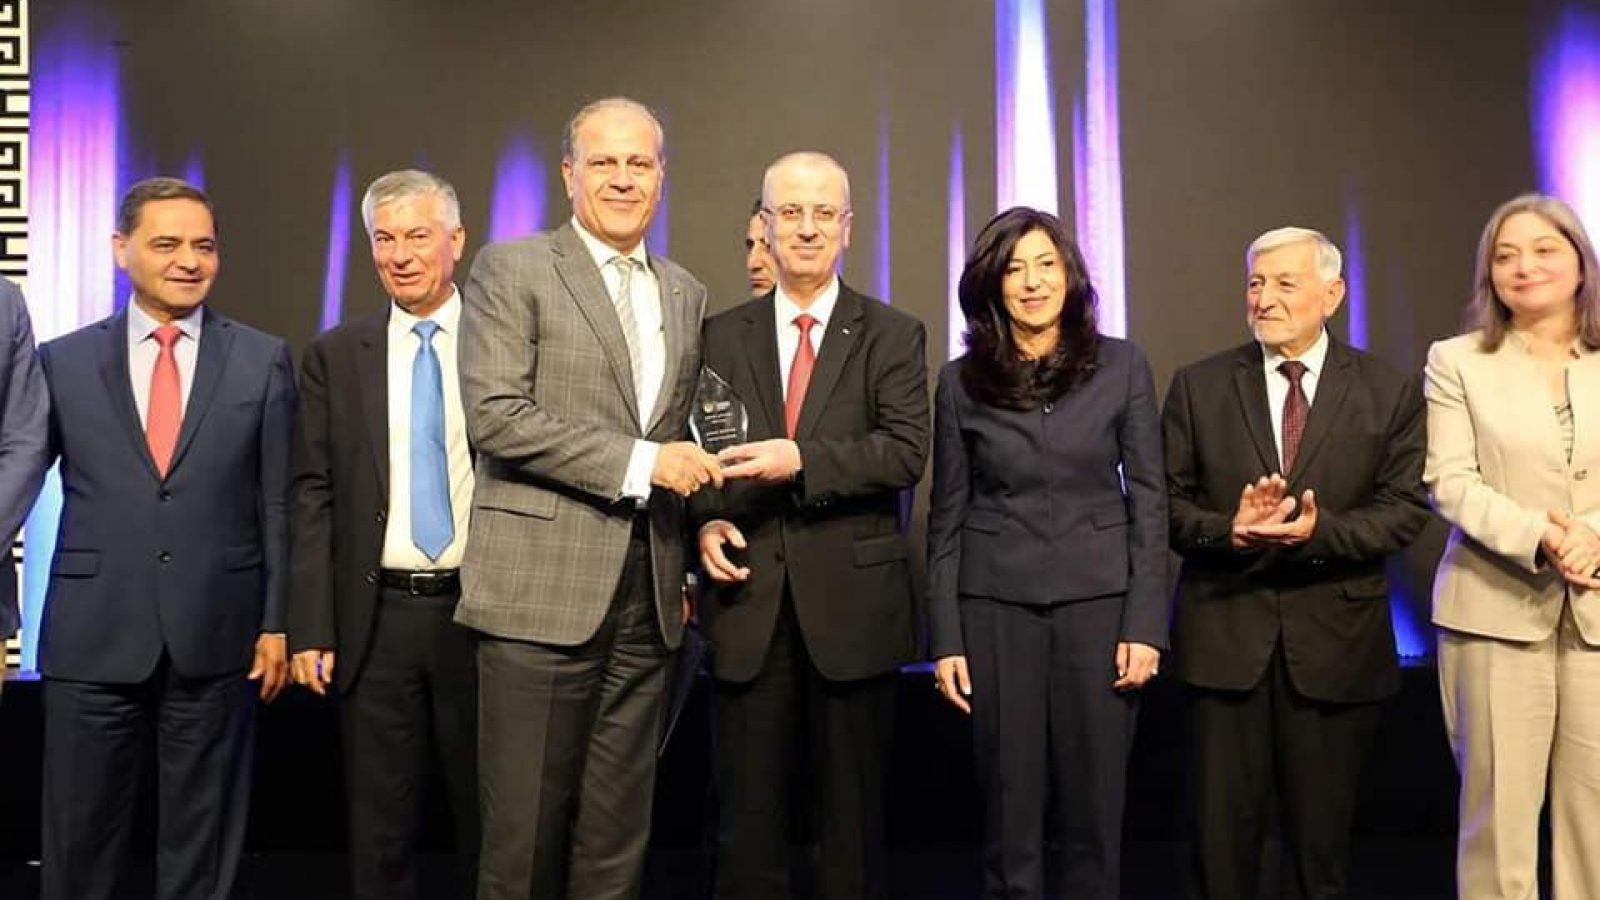 The Palestinian company Al Ard received two awards this year as the largest Palestinian exporter of oil and agricultural products.